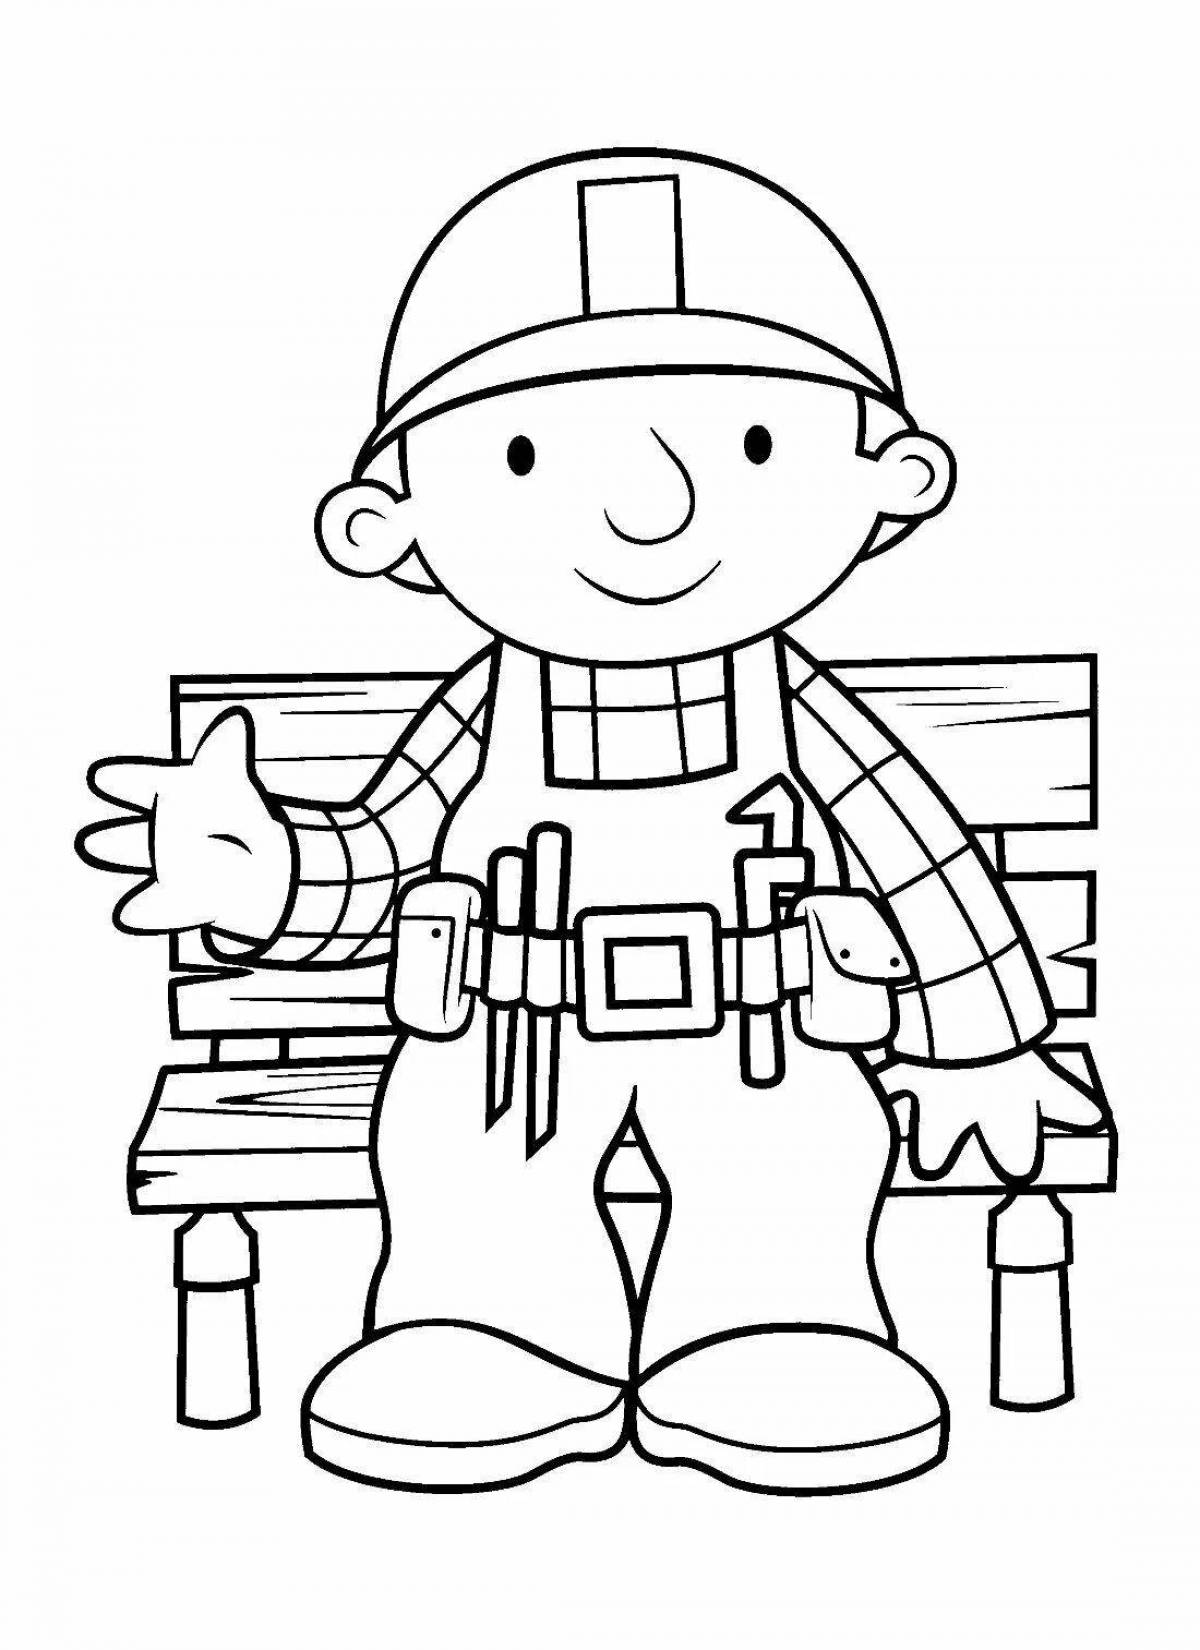 Coloring book fascinating construction professions